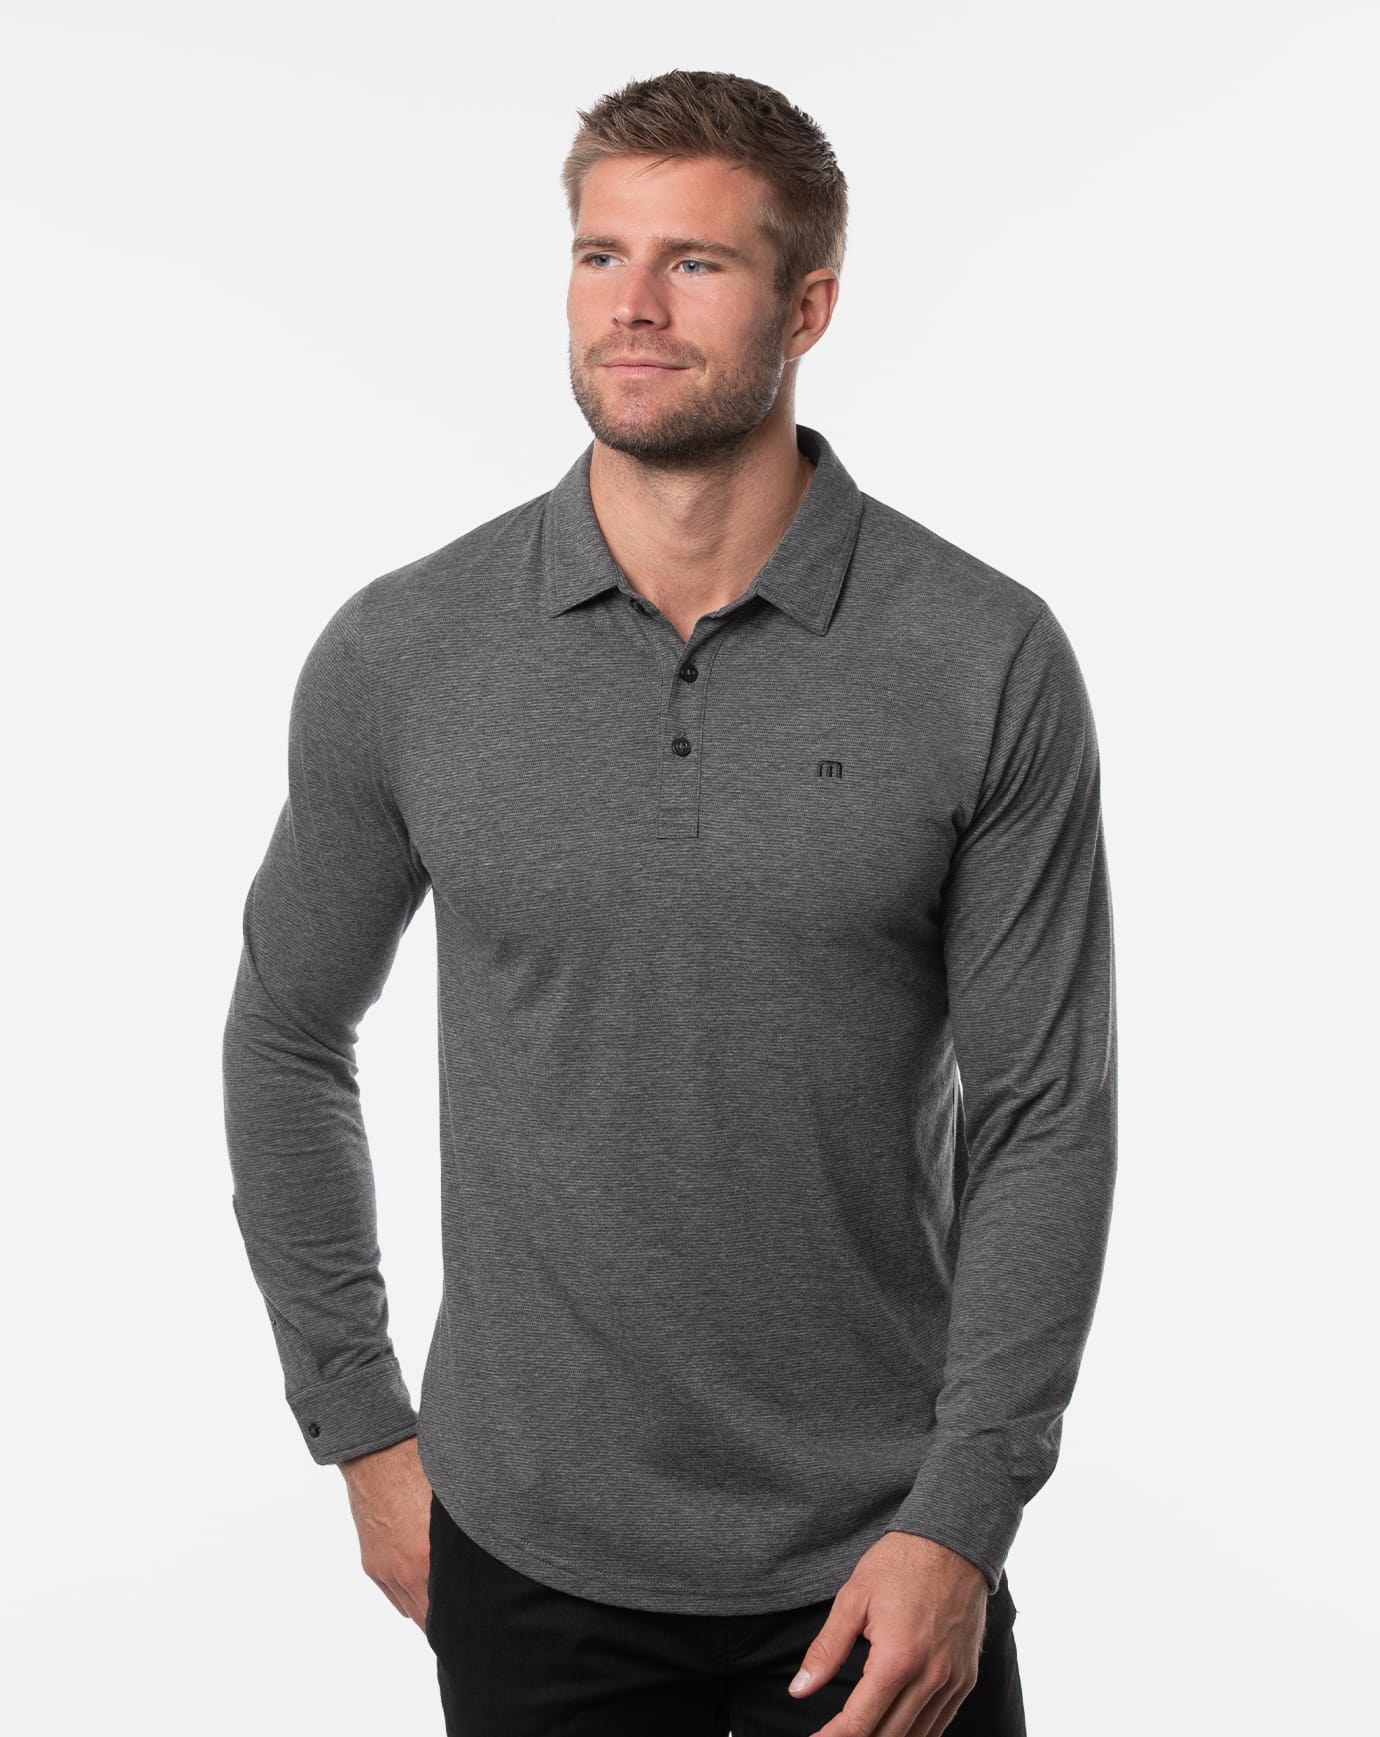 Related Product - BEGINNERS LUCK LONG SLEEVE POLO